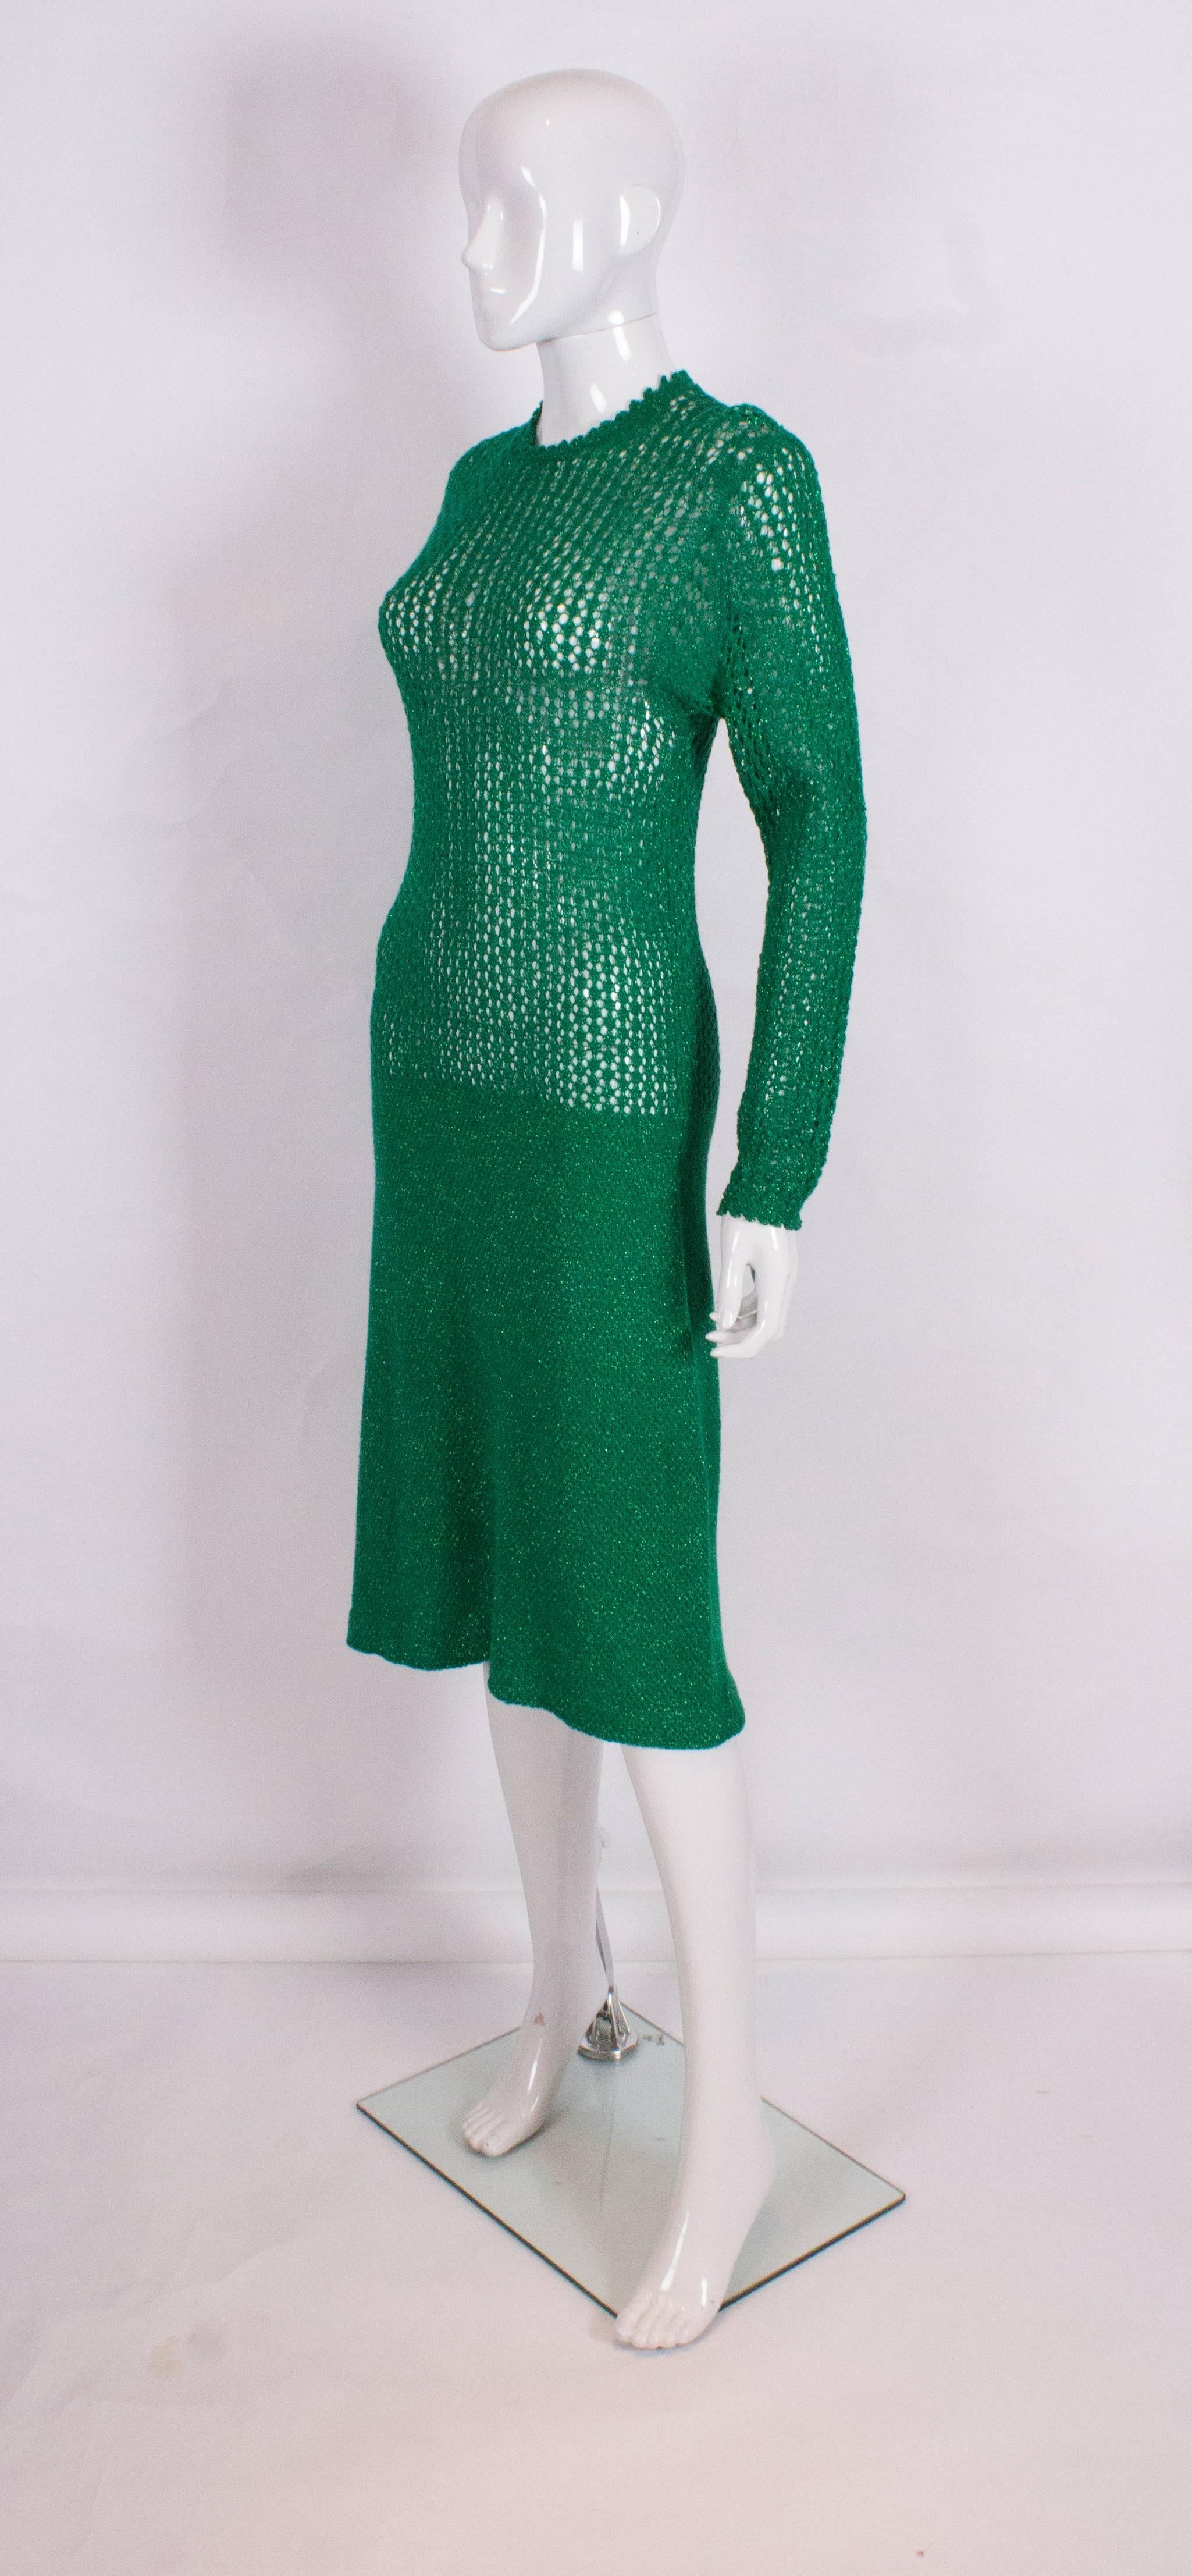 A great knitted dress, in a lovely shade of green with subtle sparkles.The dress has a round neck, popper opening at the back and an Aline skirt in a tighter knit.